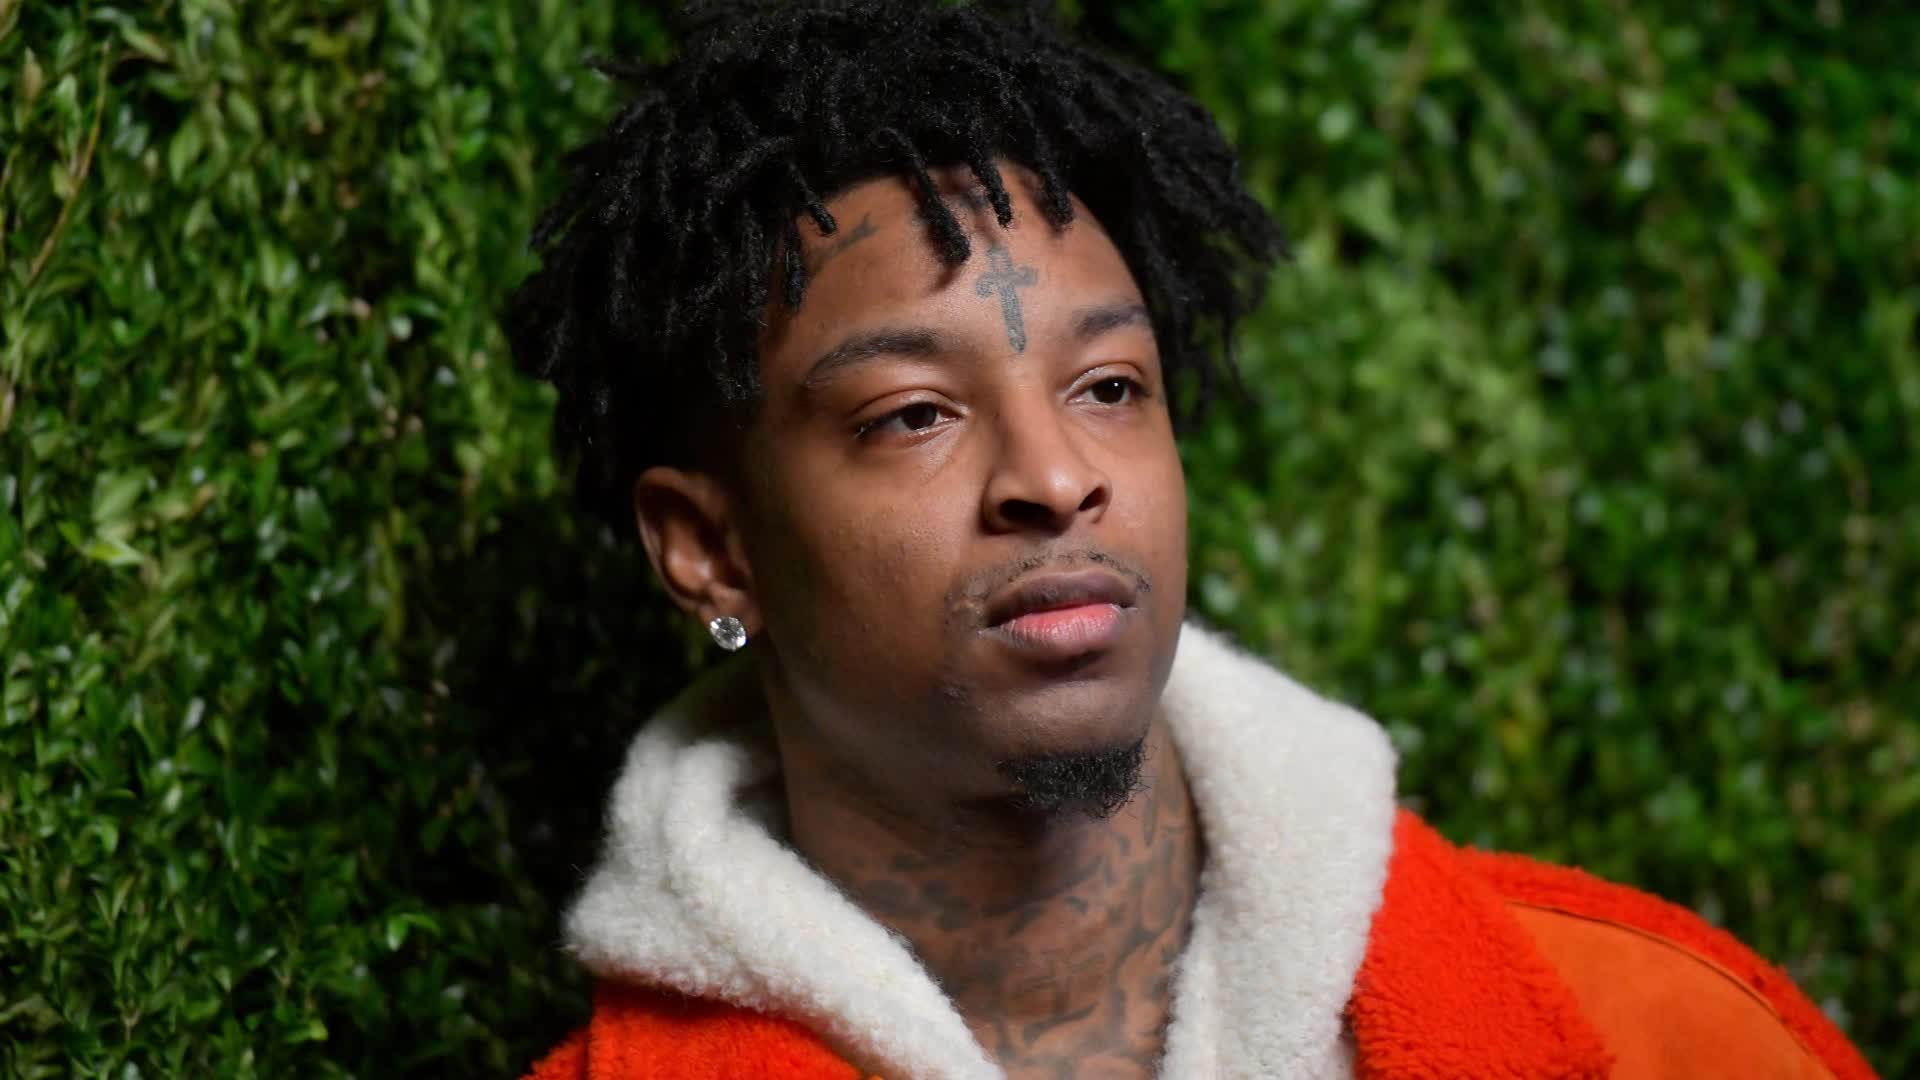 Rapper 21 Savage donates $25,000 to help detained immigrants fight